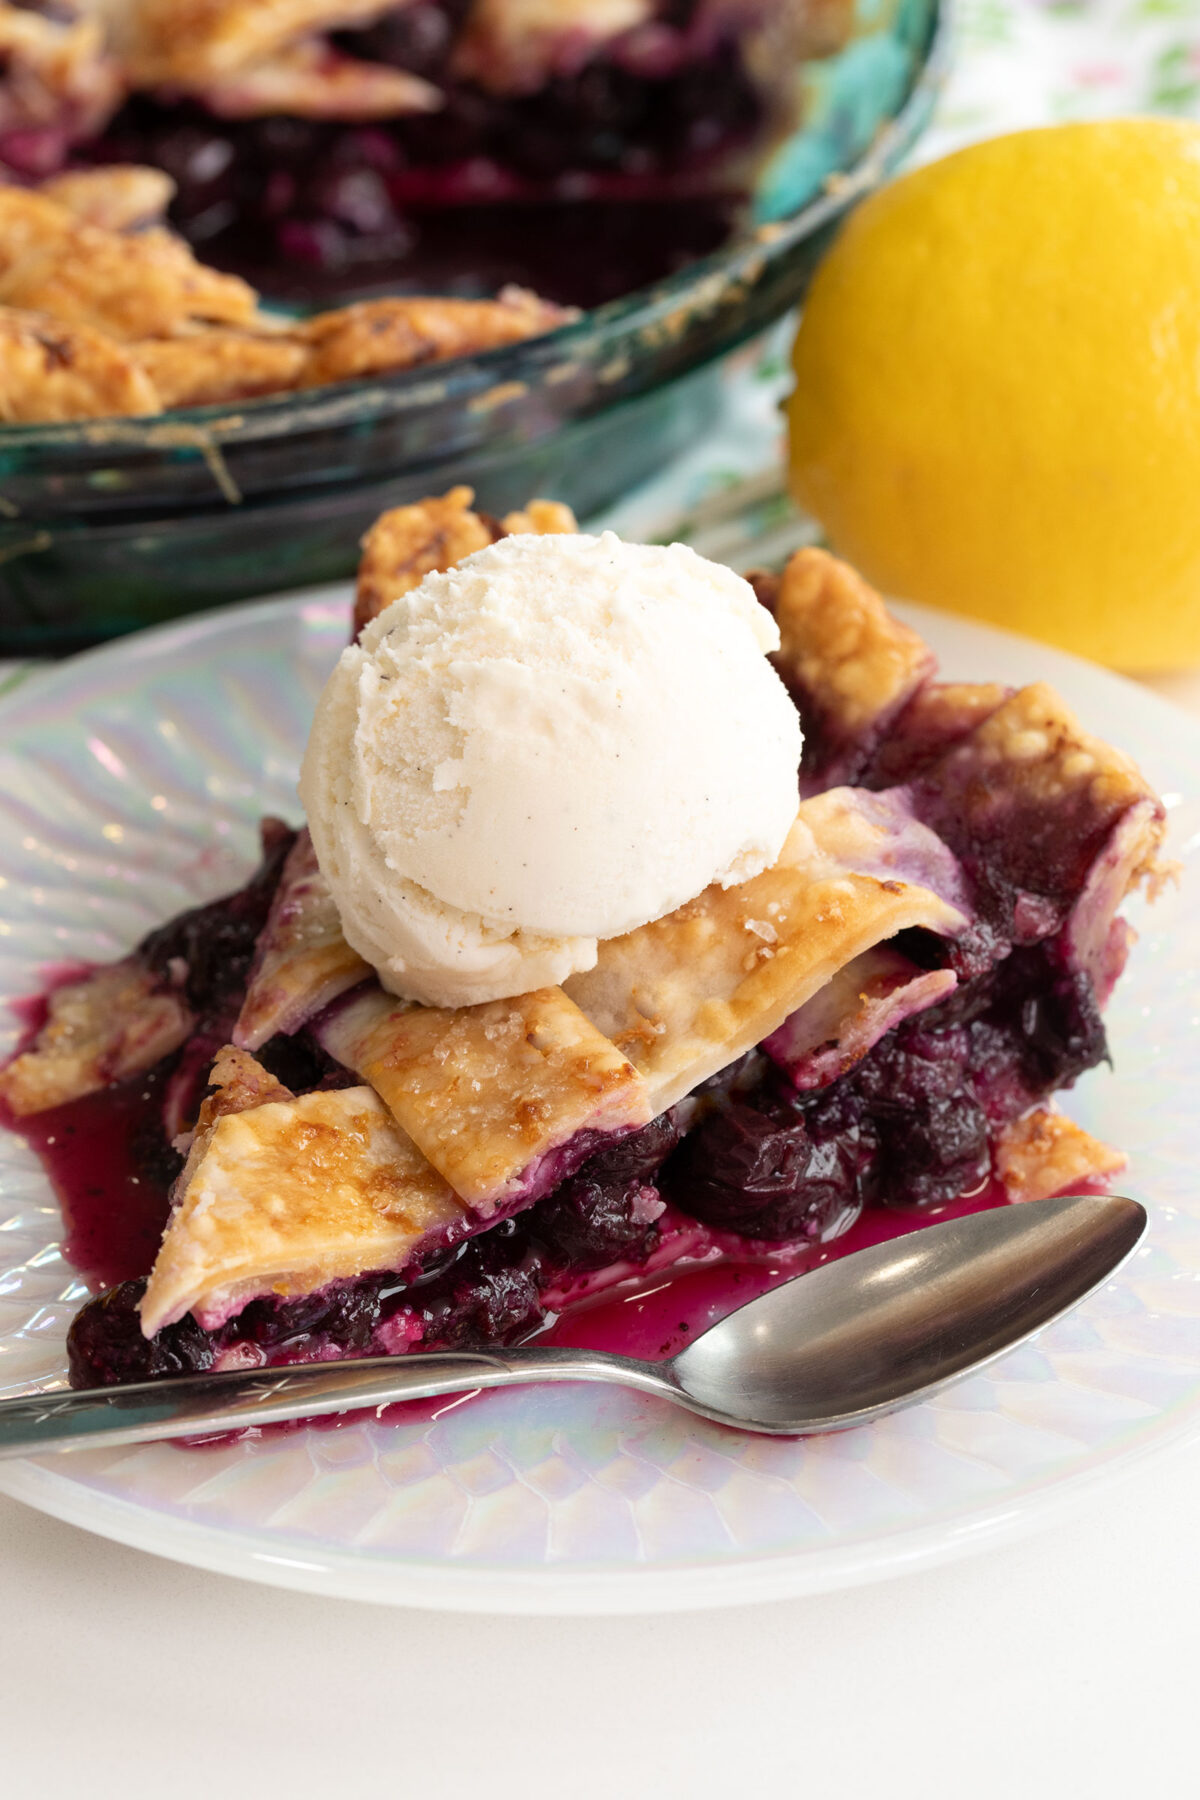 a slice of Lemon blueberry pie on a white plate with a scoop of vanilla ice cream on top.